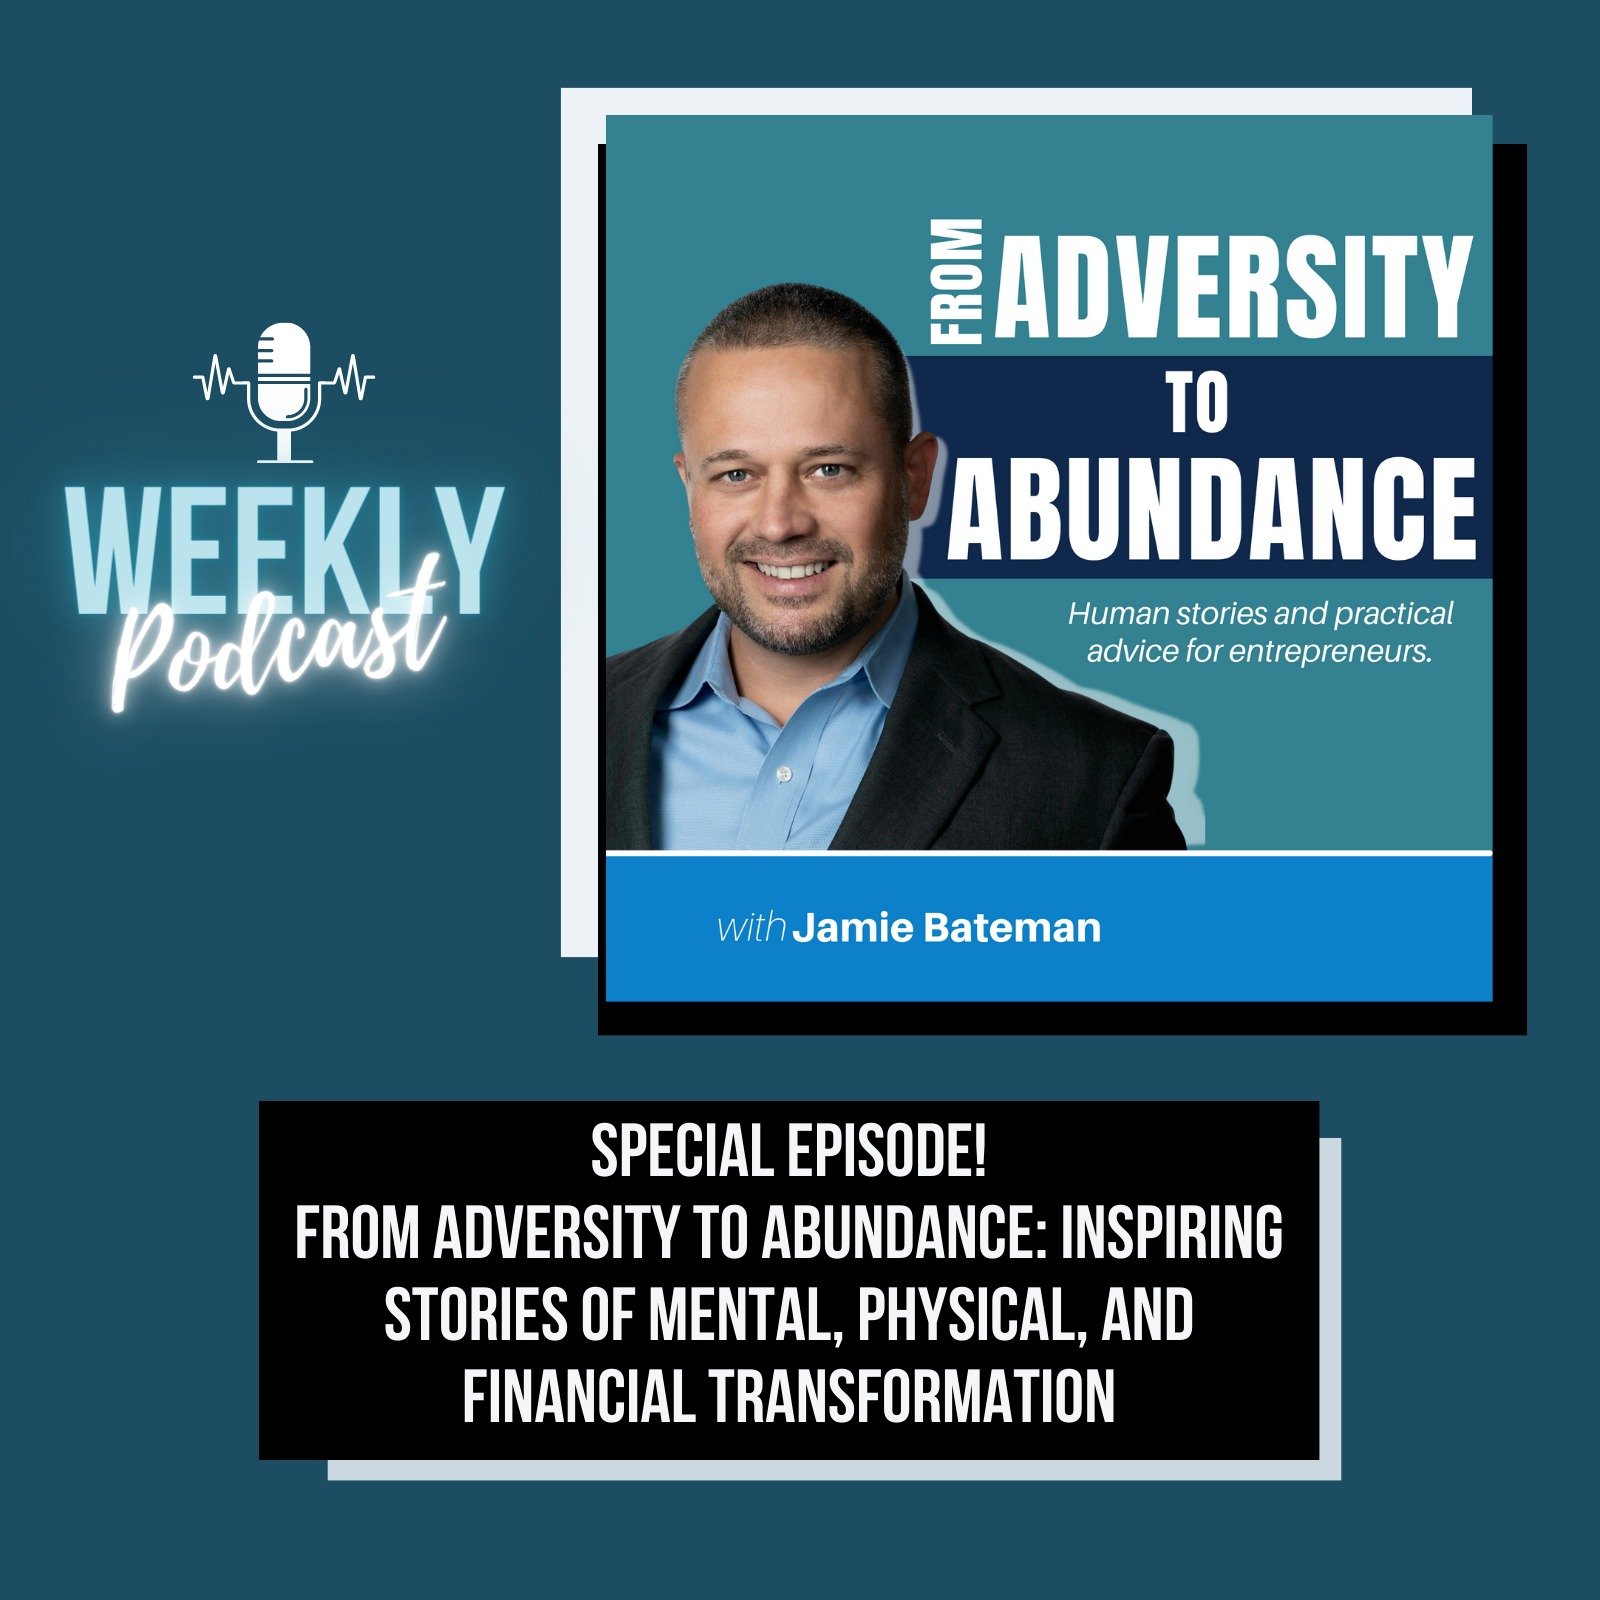 Special Episode! From Adversity to Abundance: Inspiring Stories of Mental, Physical, and Financial Transformation